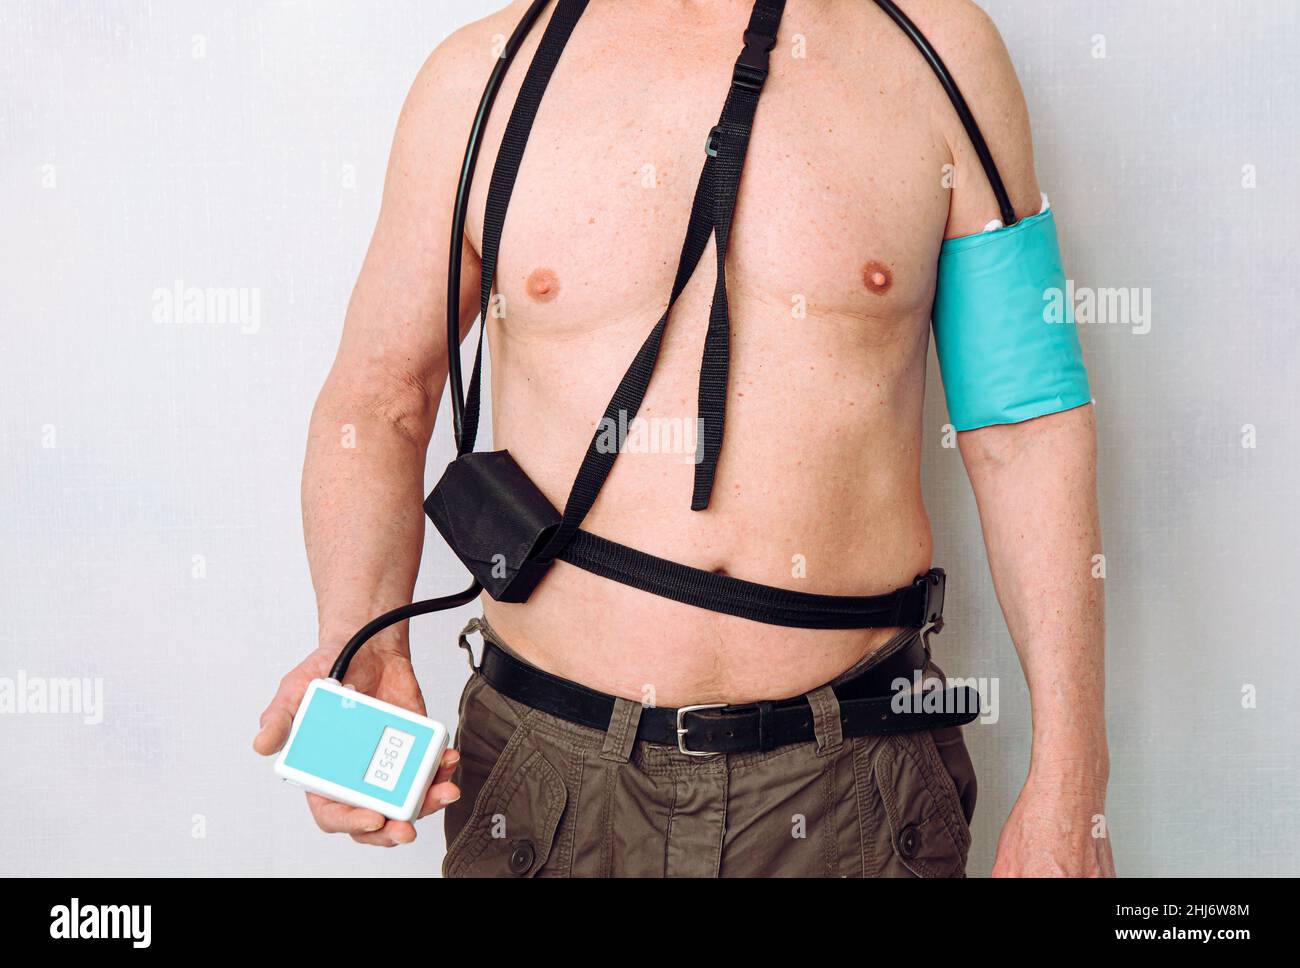 Body of a middle aged man using portable Ambulatory Blood Pressure Monitor (ABPM) for taking measurements during normal daily activities at home. Stock Photo